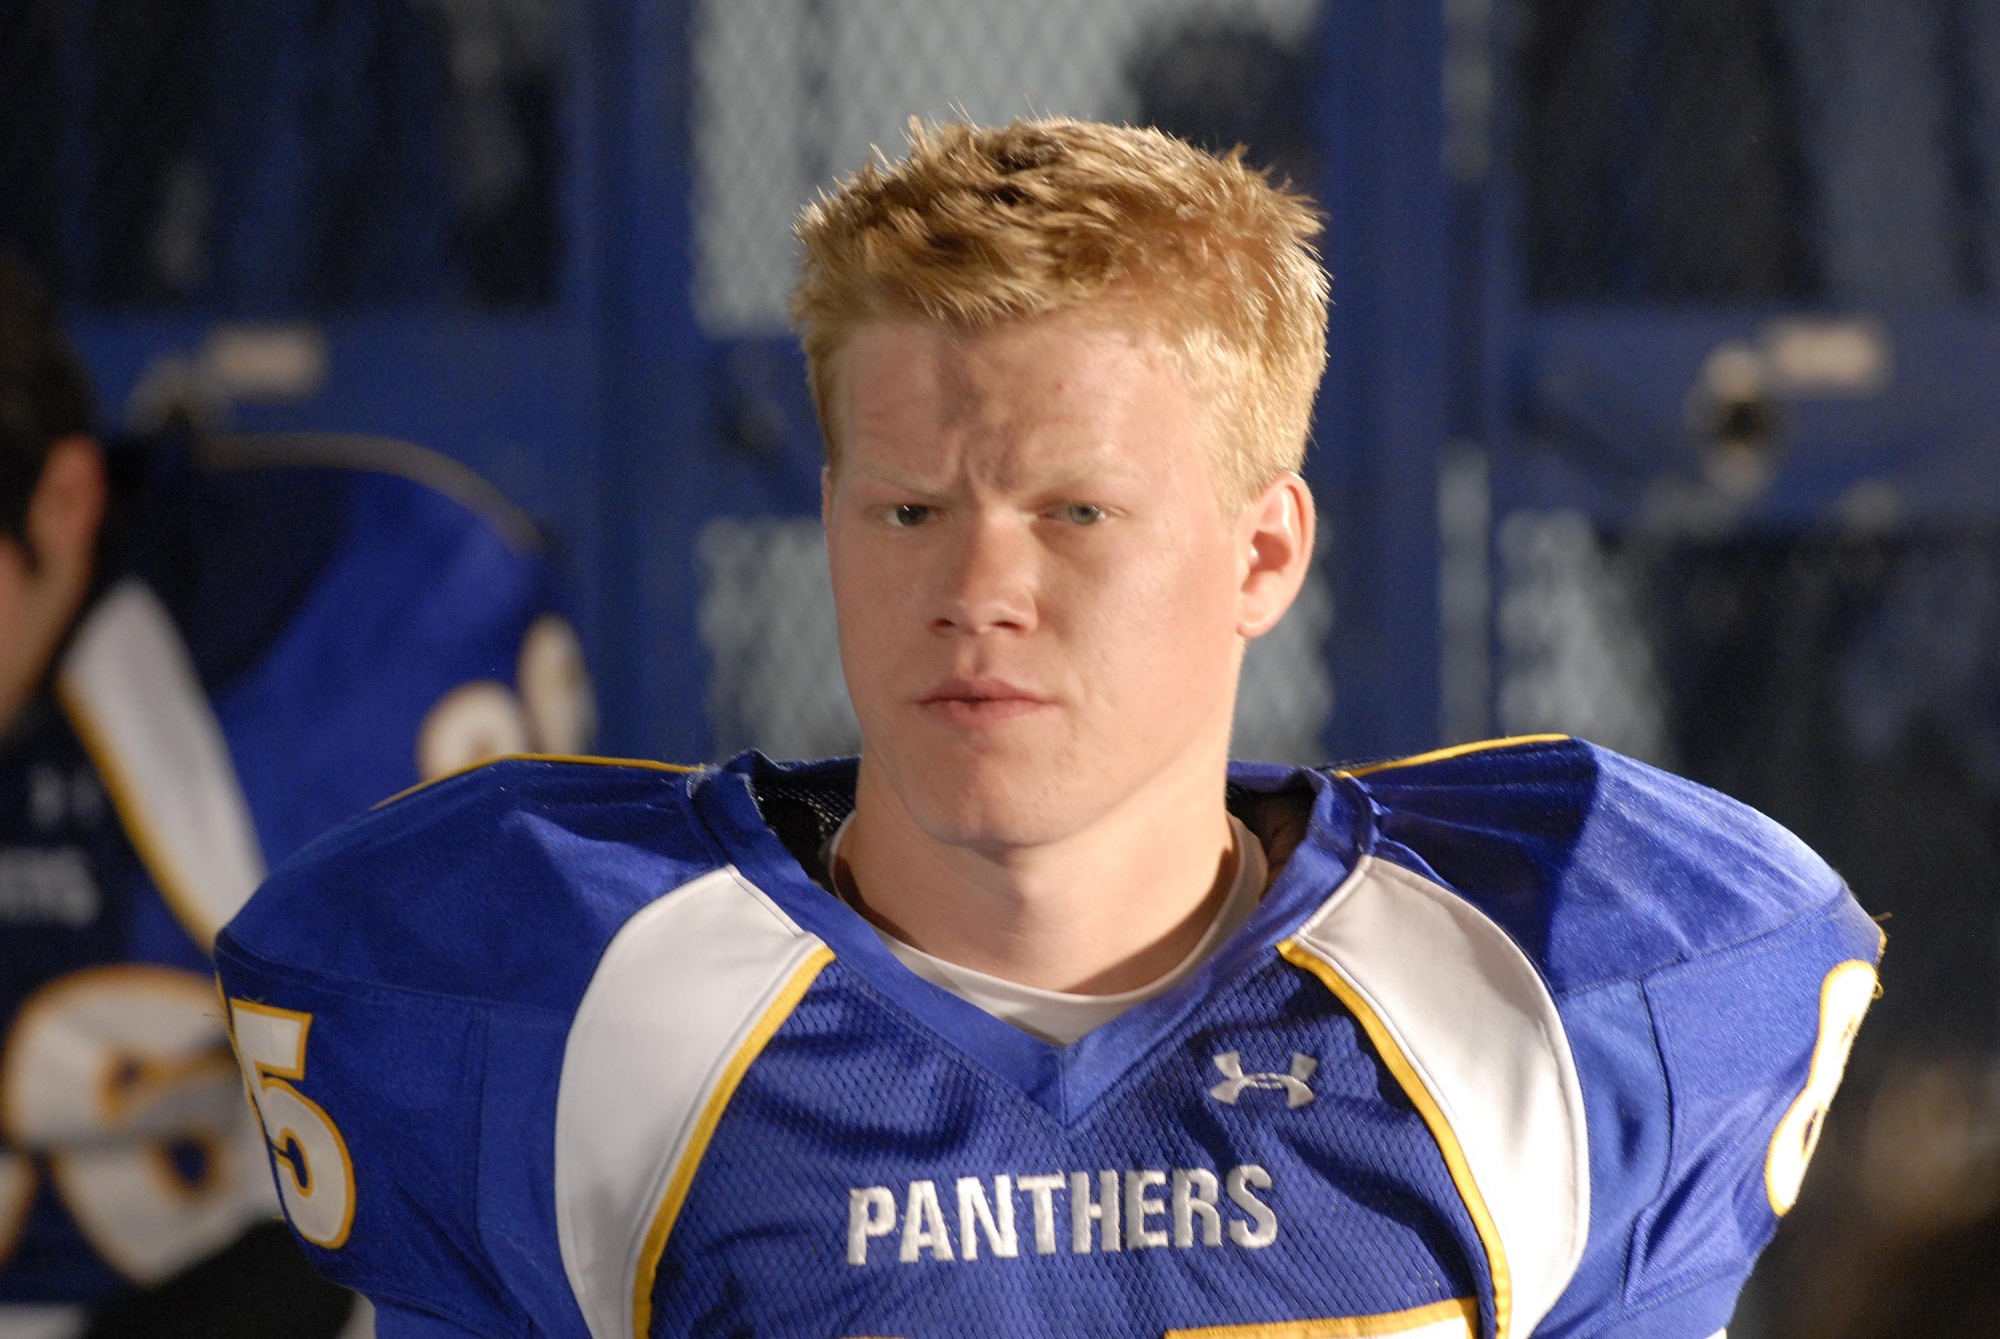 Jesse Plemons trying not to get arrested for murder, probably.